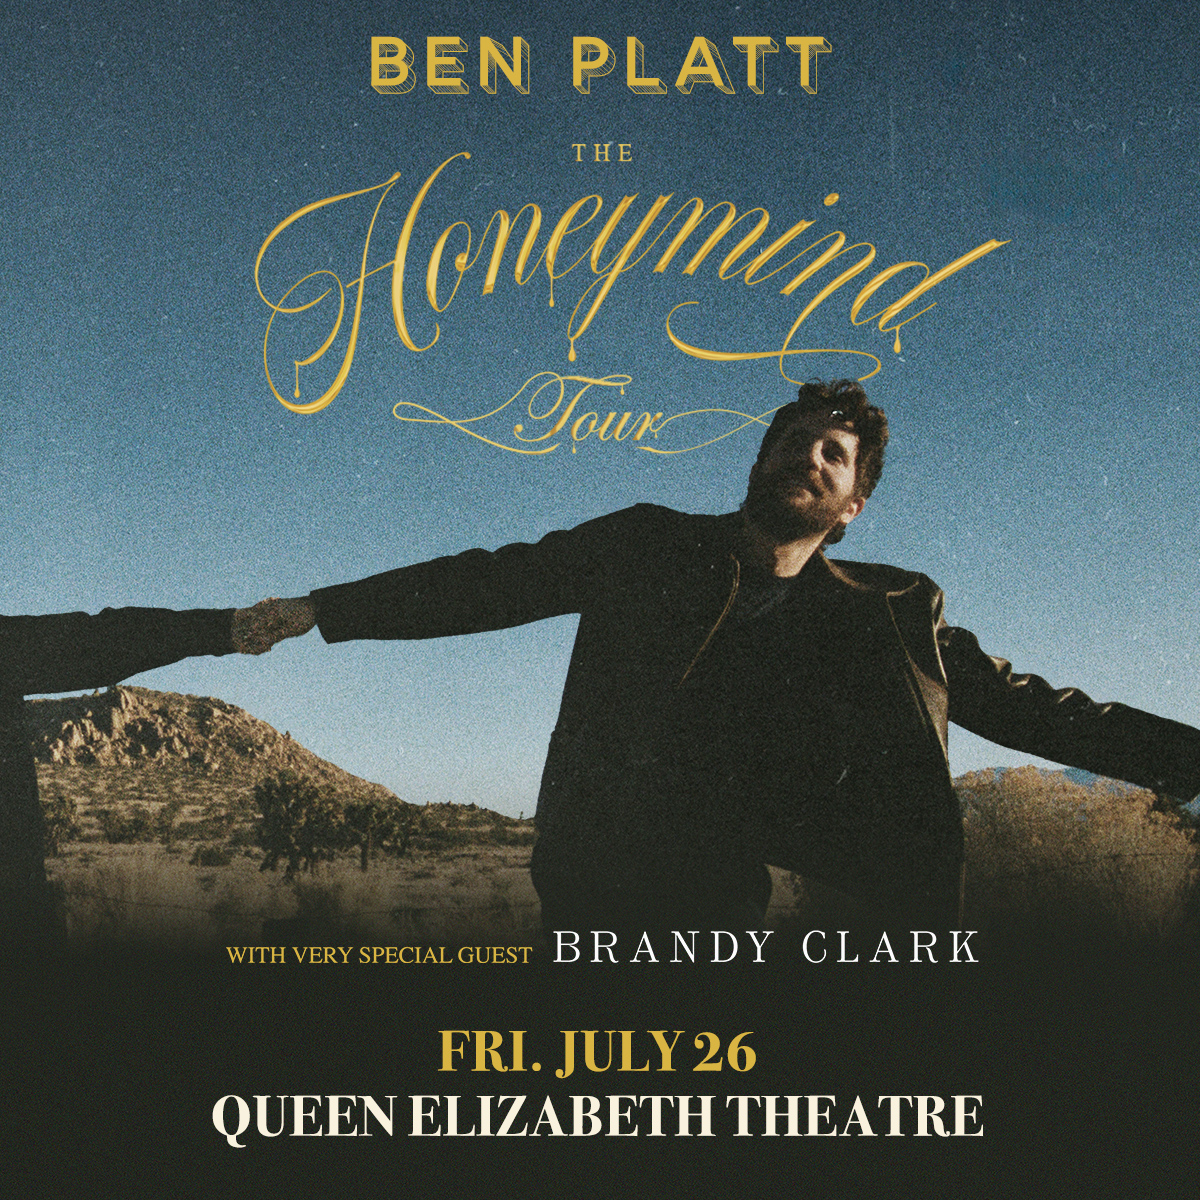 🆕Ben Platt brings The Honeymind Tour to the 🎭Queen Elizabeth Theatre 🗓️Jul 26, 2024. Hurry PRESALE ends tonight at 10pm! PRESALE: APRIL 17 UNTIL 10PM (use code: CHERRY) GENERAL ON SALE: APRIL 18 AT 10AM 🎟Buy tickets at: bit.ly/3TUDERm